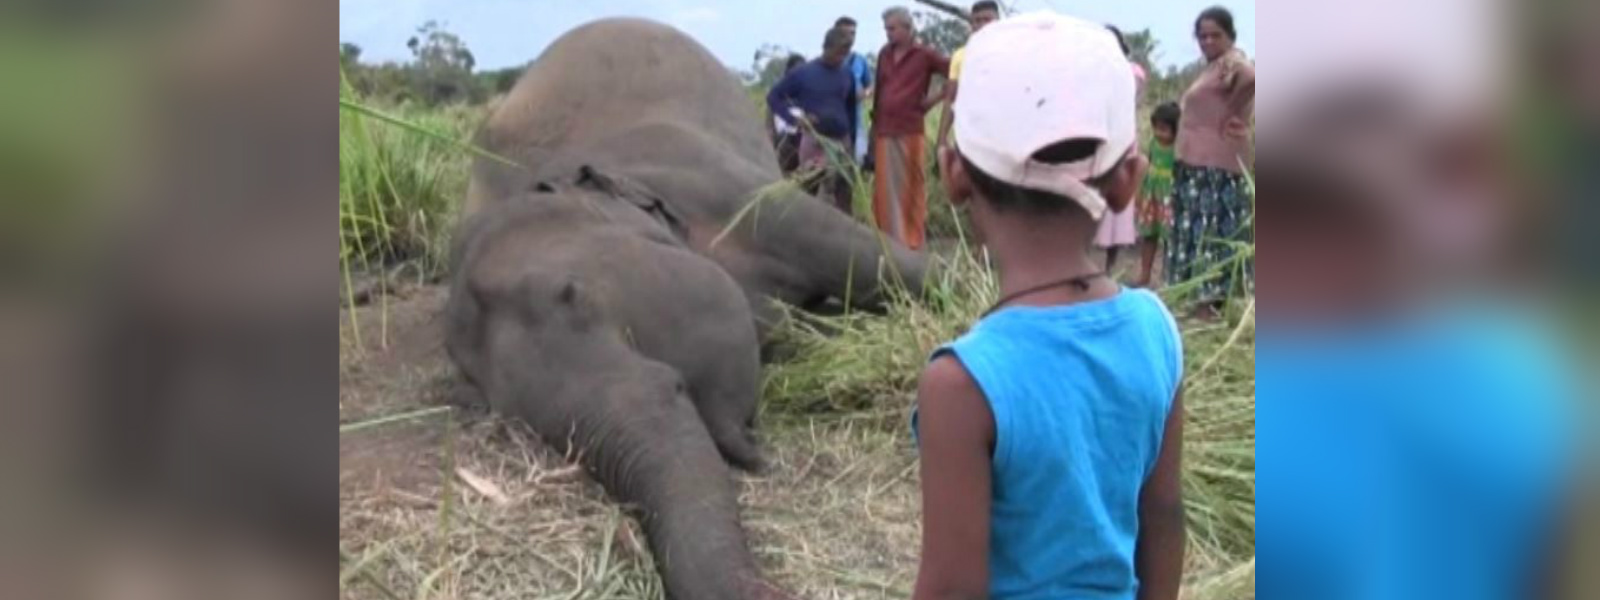 Parts of elephants sent to 3 institutions